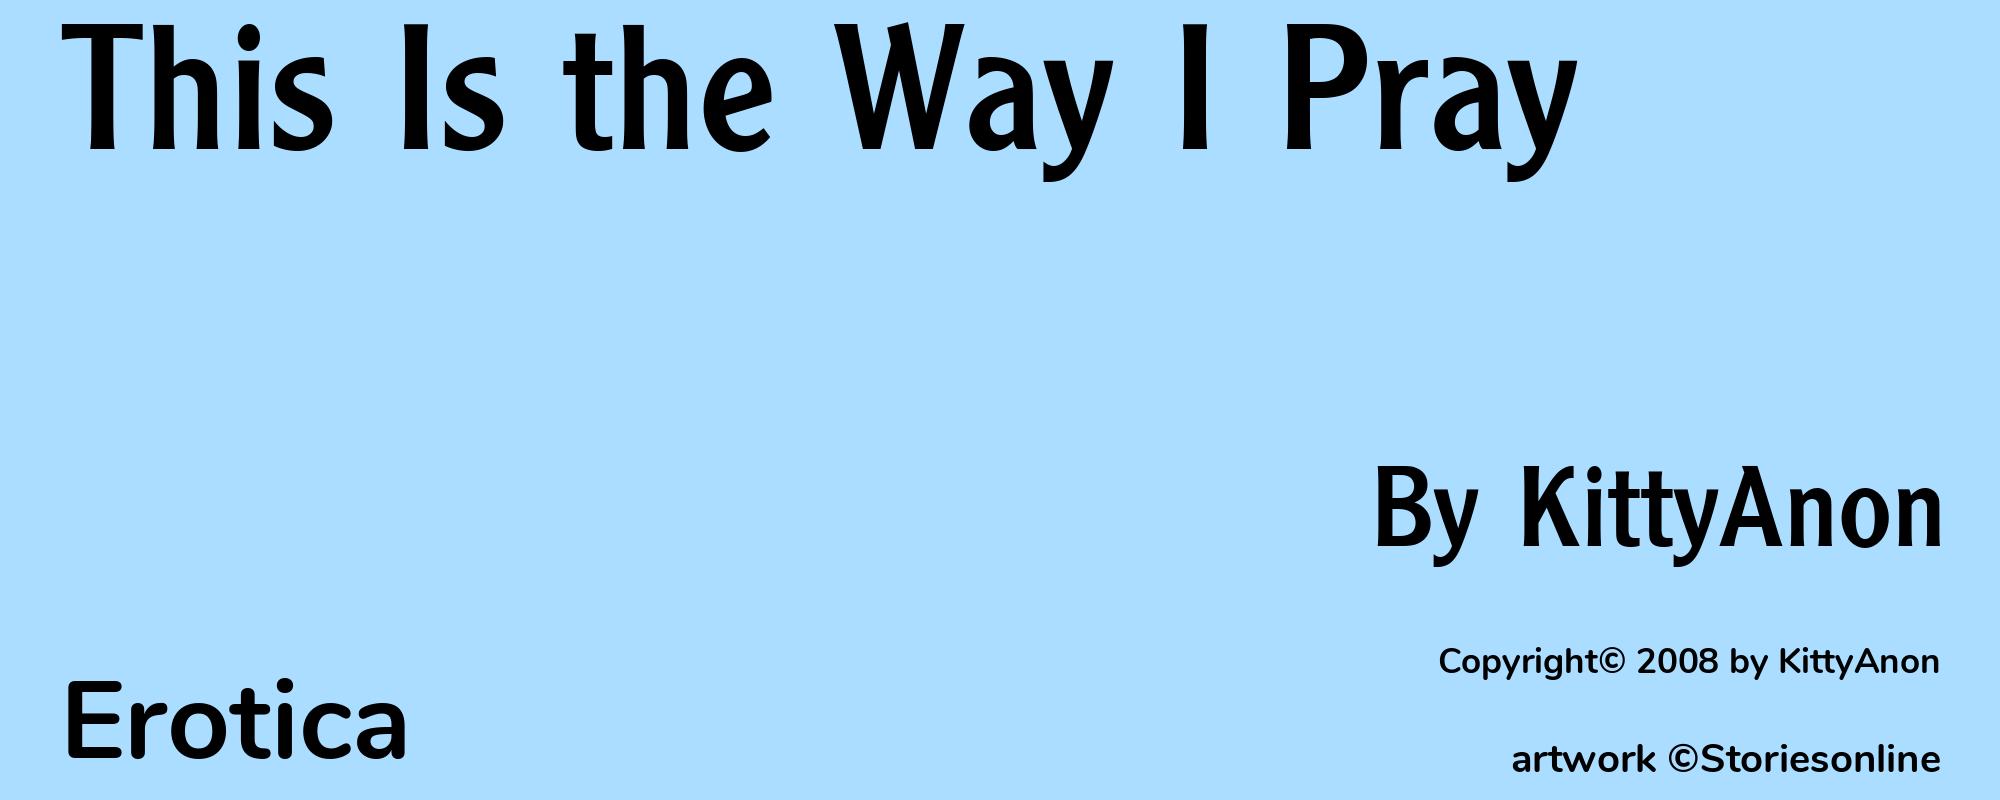 This Is the Way I Pray - Cover